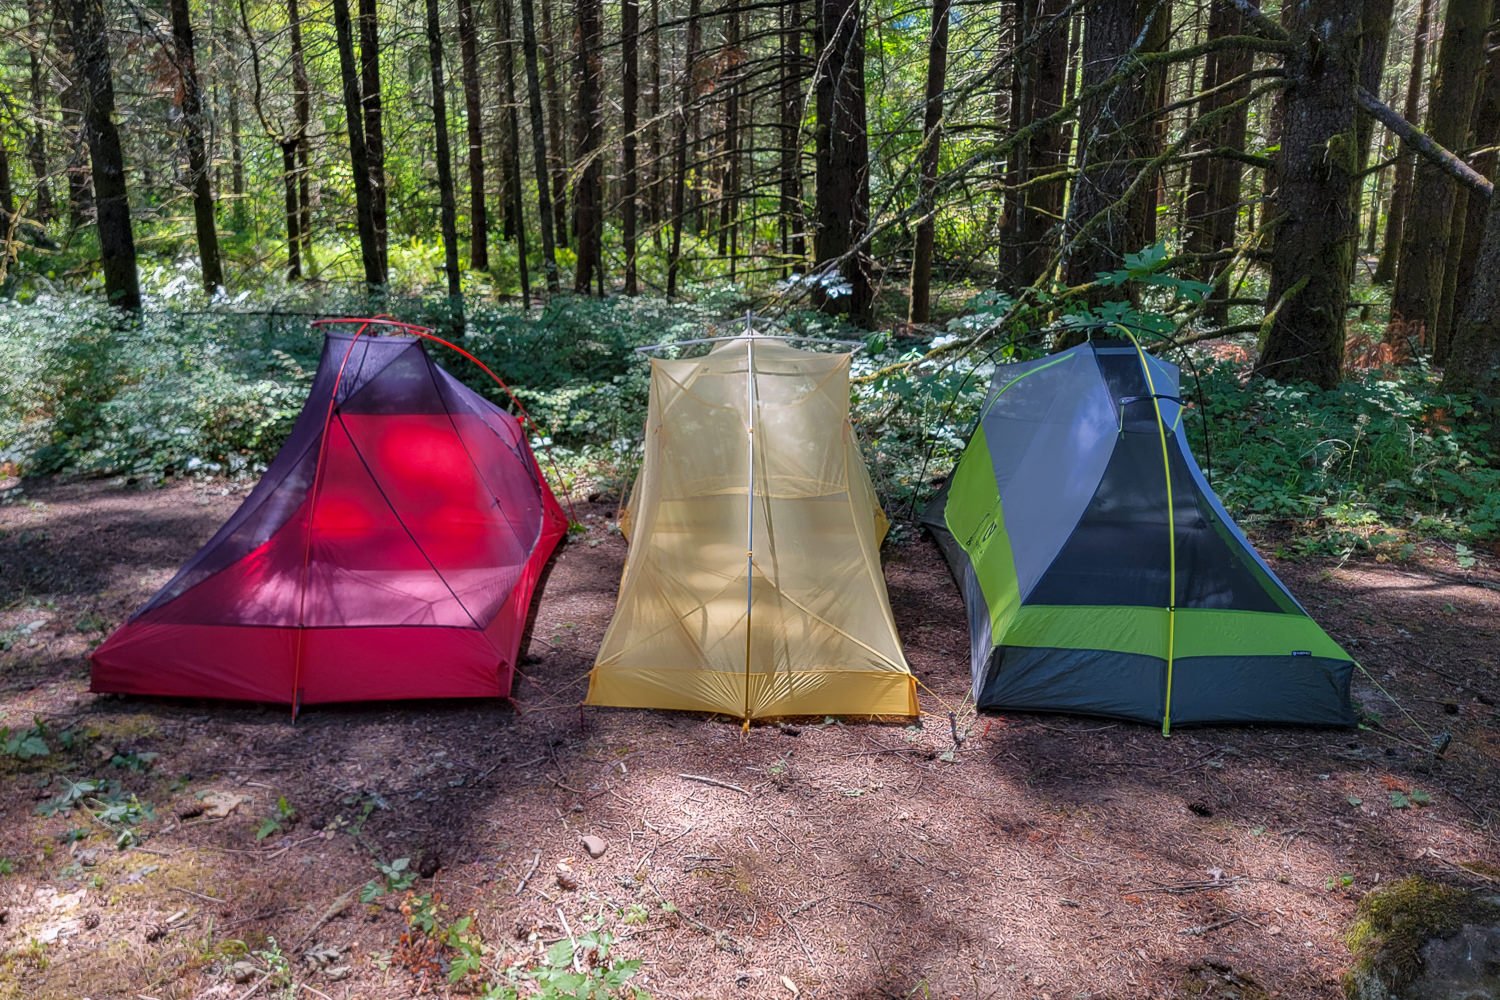 The MSR FreeLite 2, Big Agnes Tiger Wall UL2, and NEMO Hornet OSMO 2 backpacking tents side-by-side